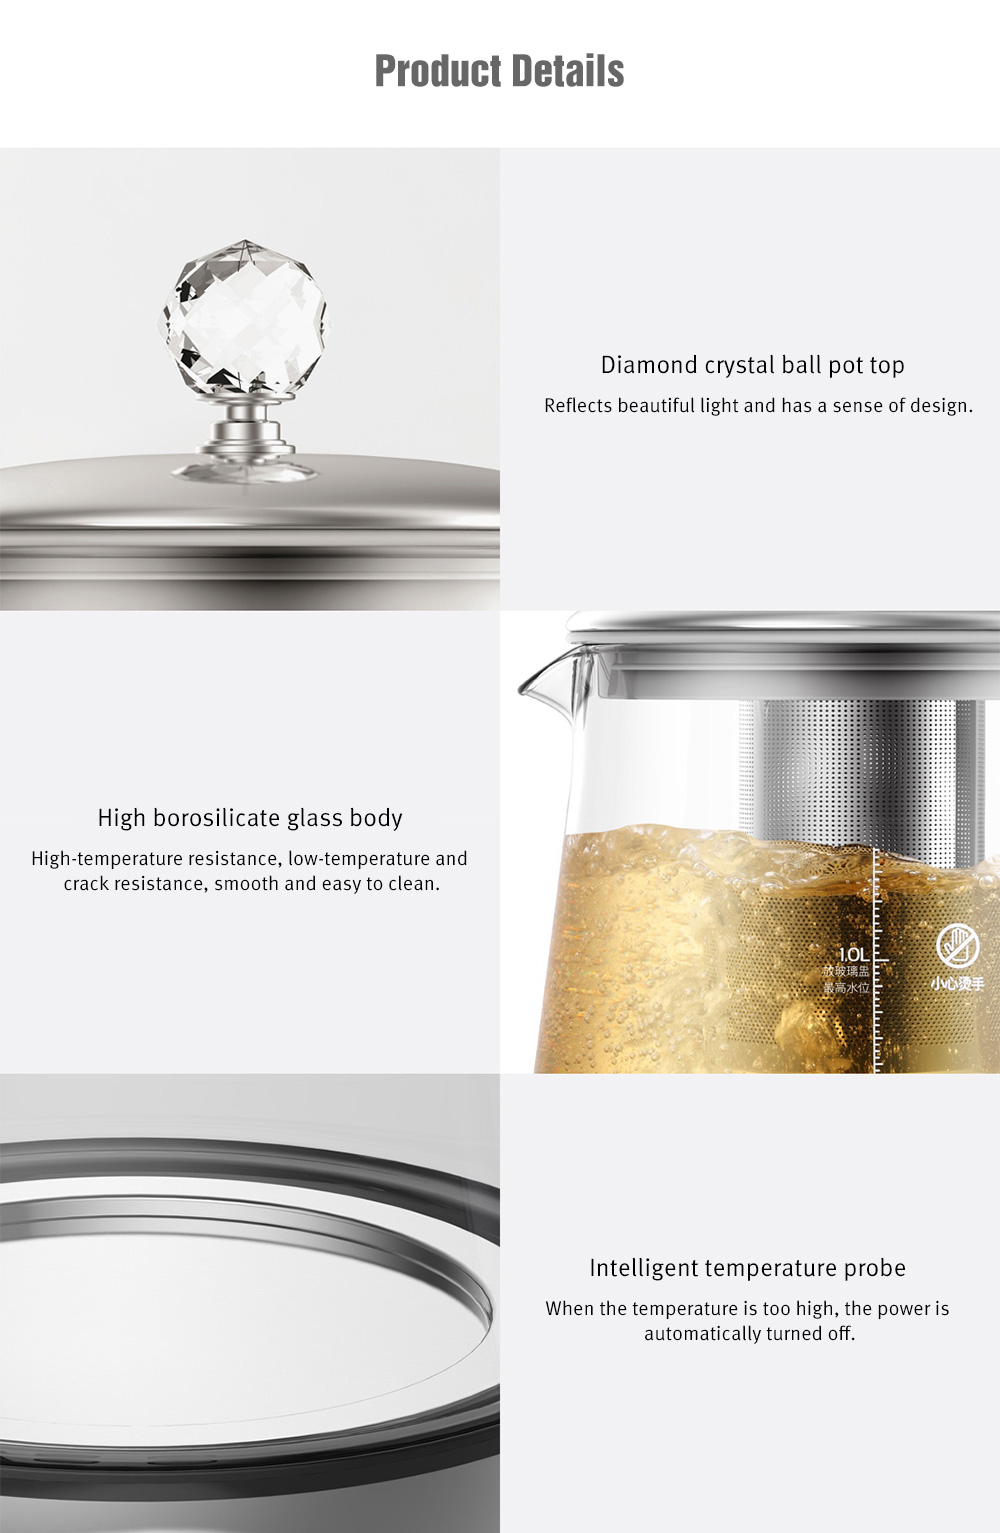 Deerma DEM - YS802 Multifunction Stainless Steel Electric Health Pot Kettle from Xiaomi Youpin